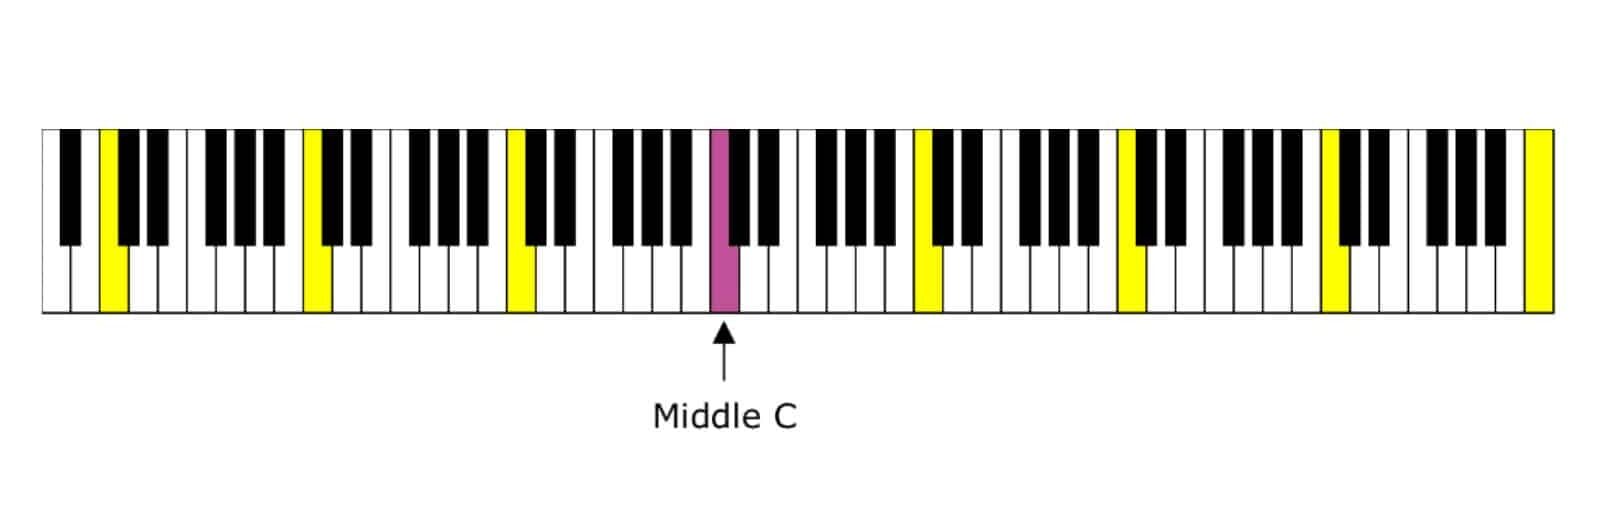  Middle C on a piano keyboard